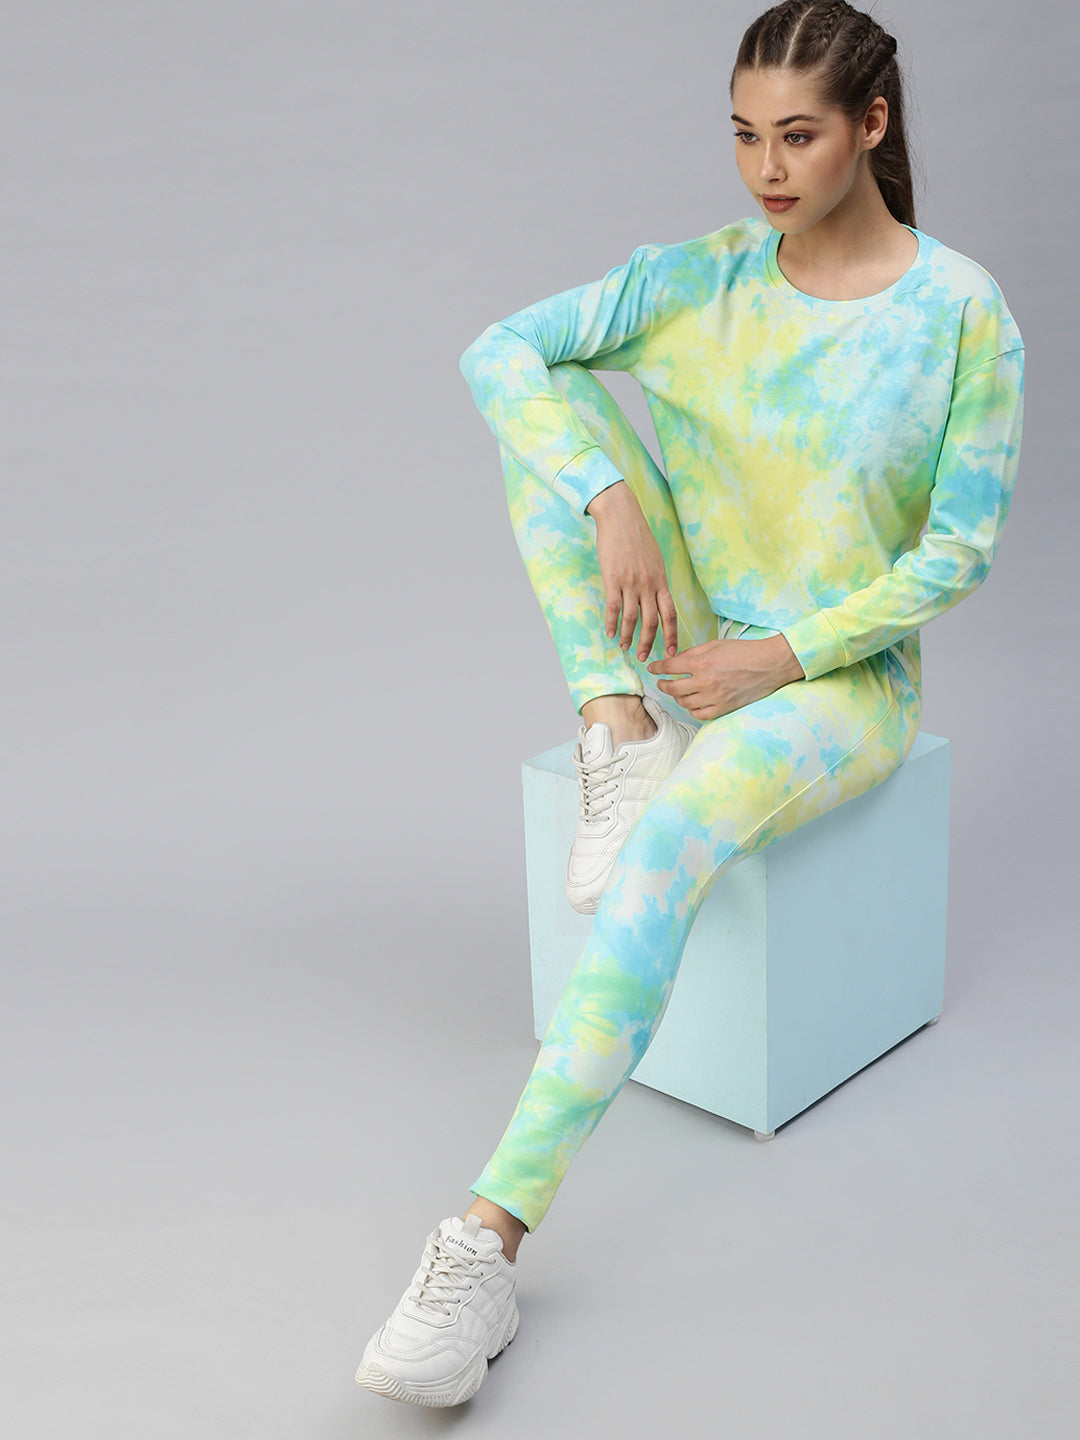 Women Tie and Dye Yellow Tracksuit